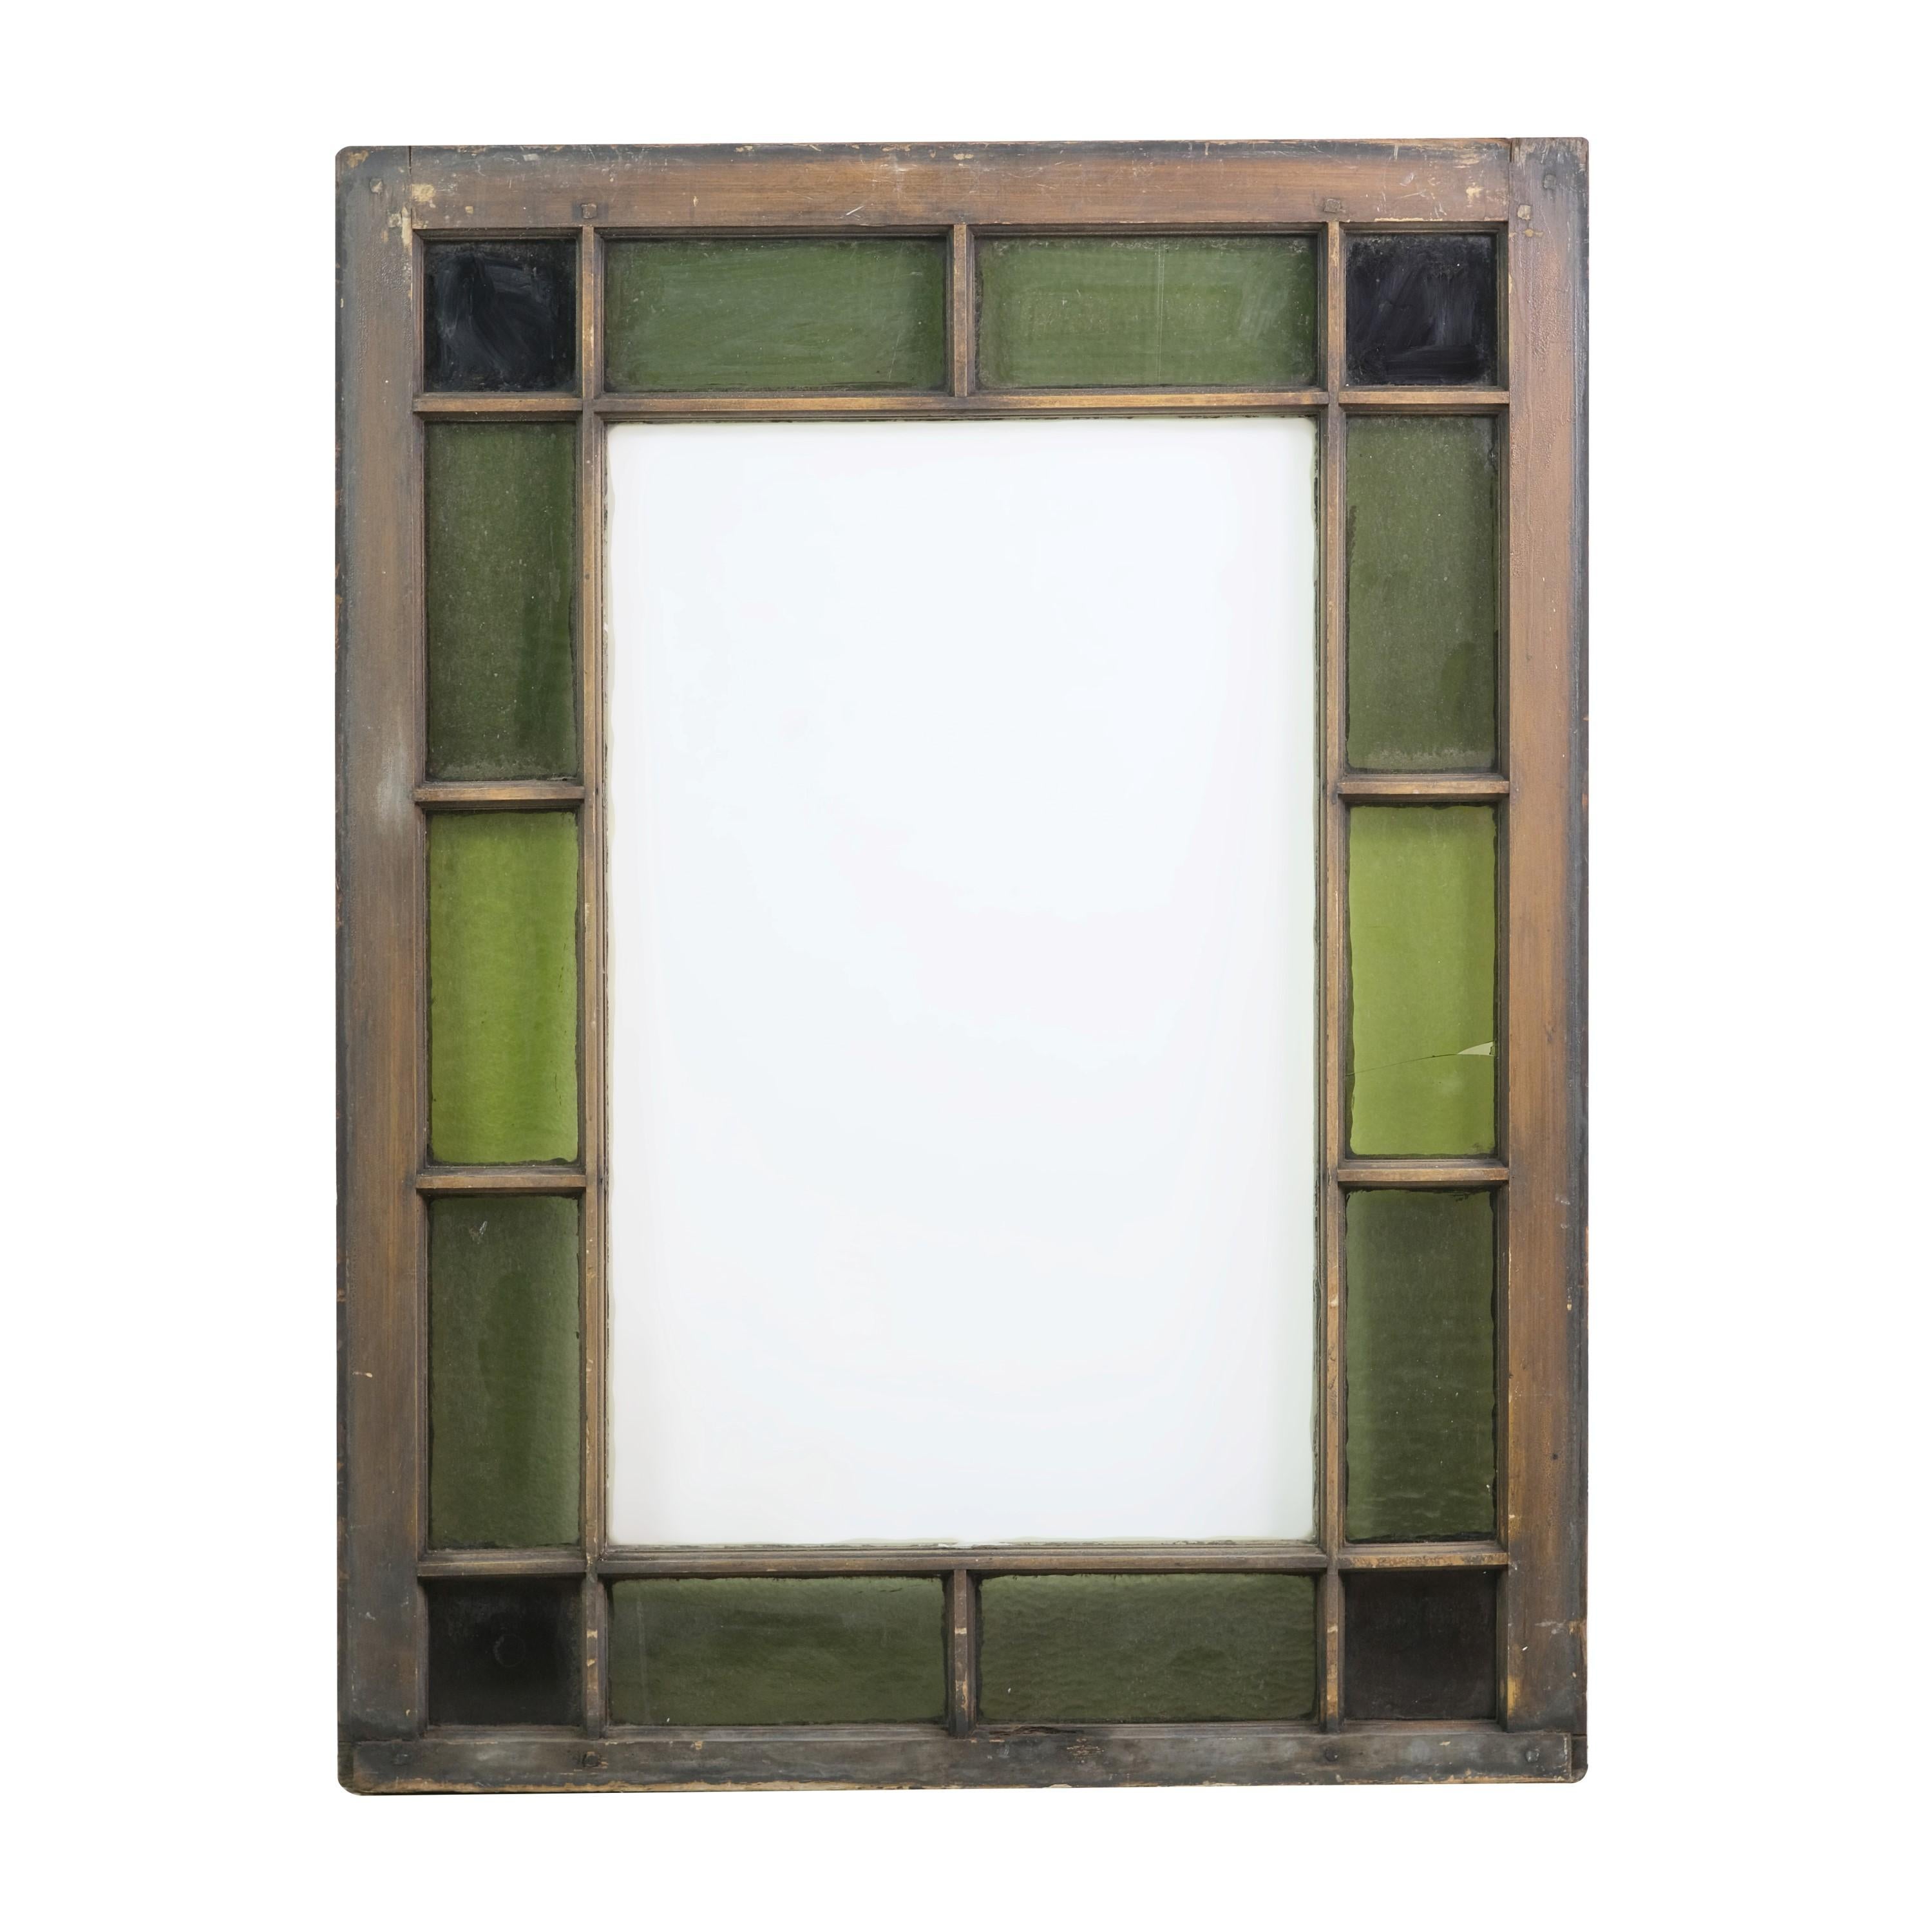 Antique Stained Glass Window Green Panes w/ Pine Frame and Clear Middle 2